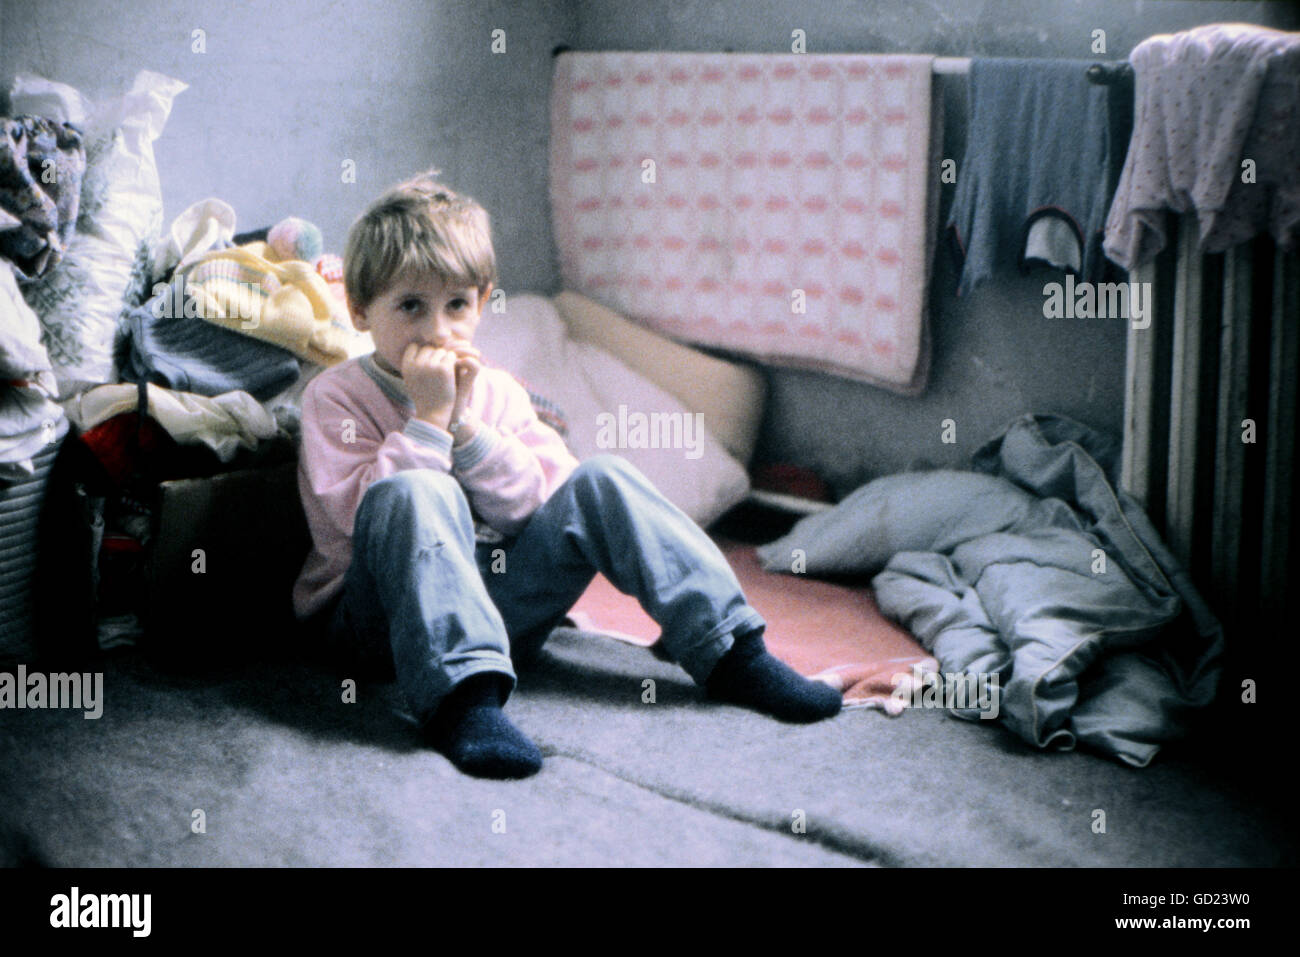 events, Bosnian War 1992 - 1995, refugees in villages around Sarajewo in Posusje, Bosnia, 15.12.1992, Yugoslavia, Yugoslav Wars, Balkans, conflict, people, misery, 1990s, 90s, 20th century, historic, historical, water, Additional-Rights-Clearences-Not Available Stock Photo